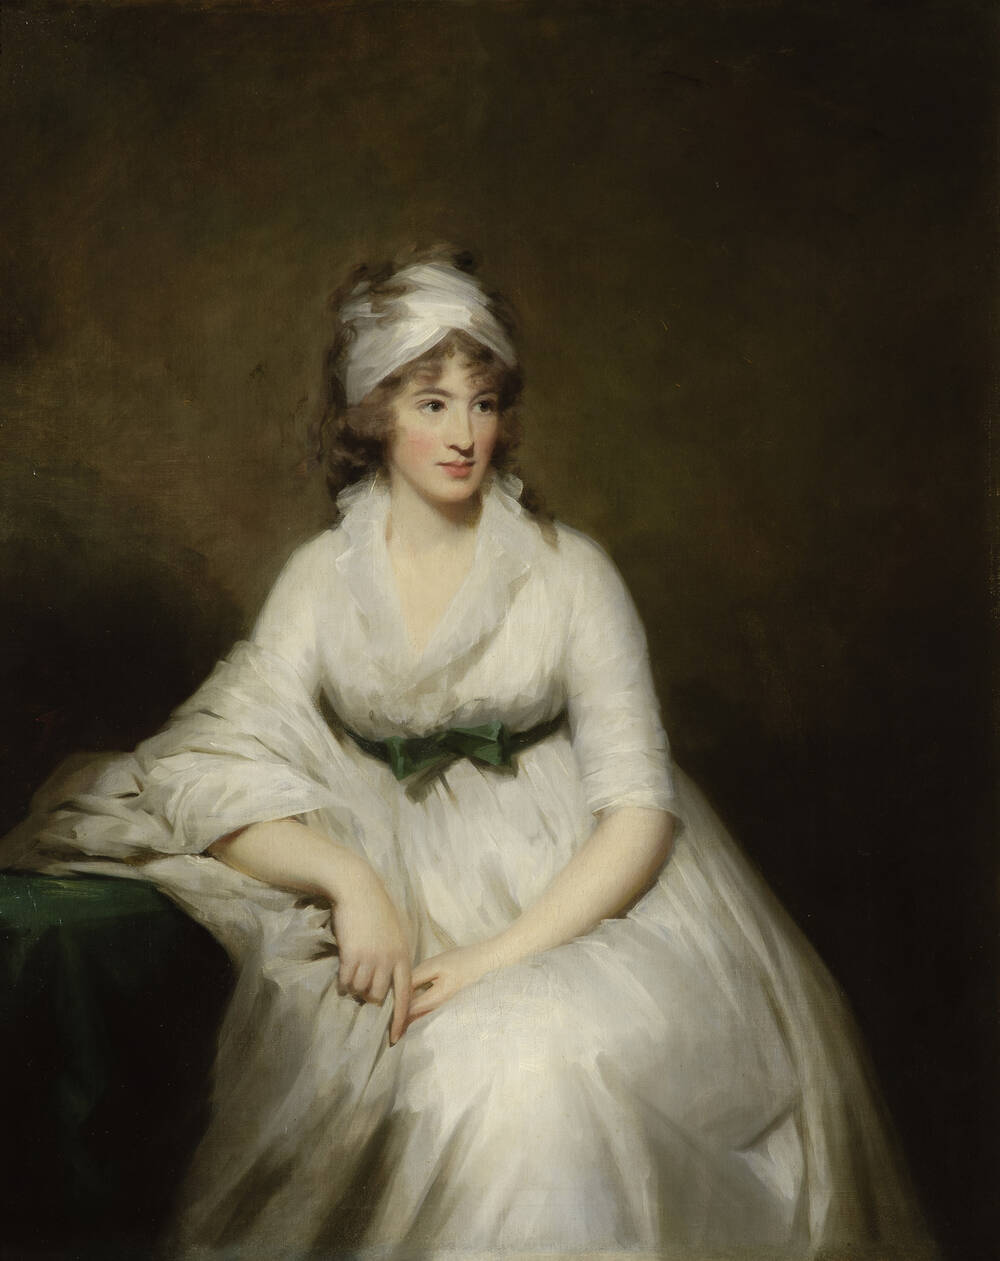 A portrait of Isabella Macleod. She is shown seated, resting one arm on her chair. She wears a billowing white dress, tied at the waist with a green sash. She has a white hair wrap, with her long brown hair falling from it.